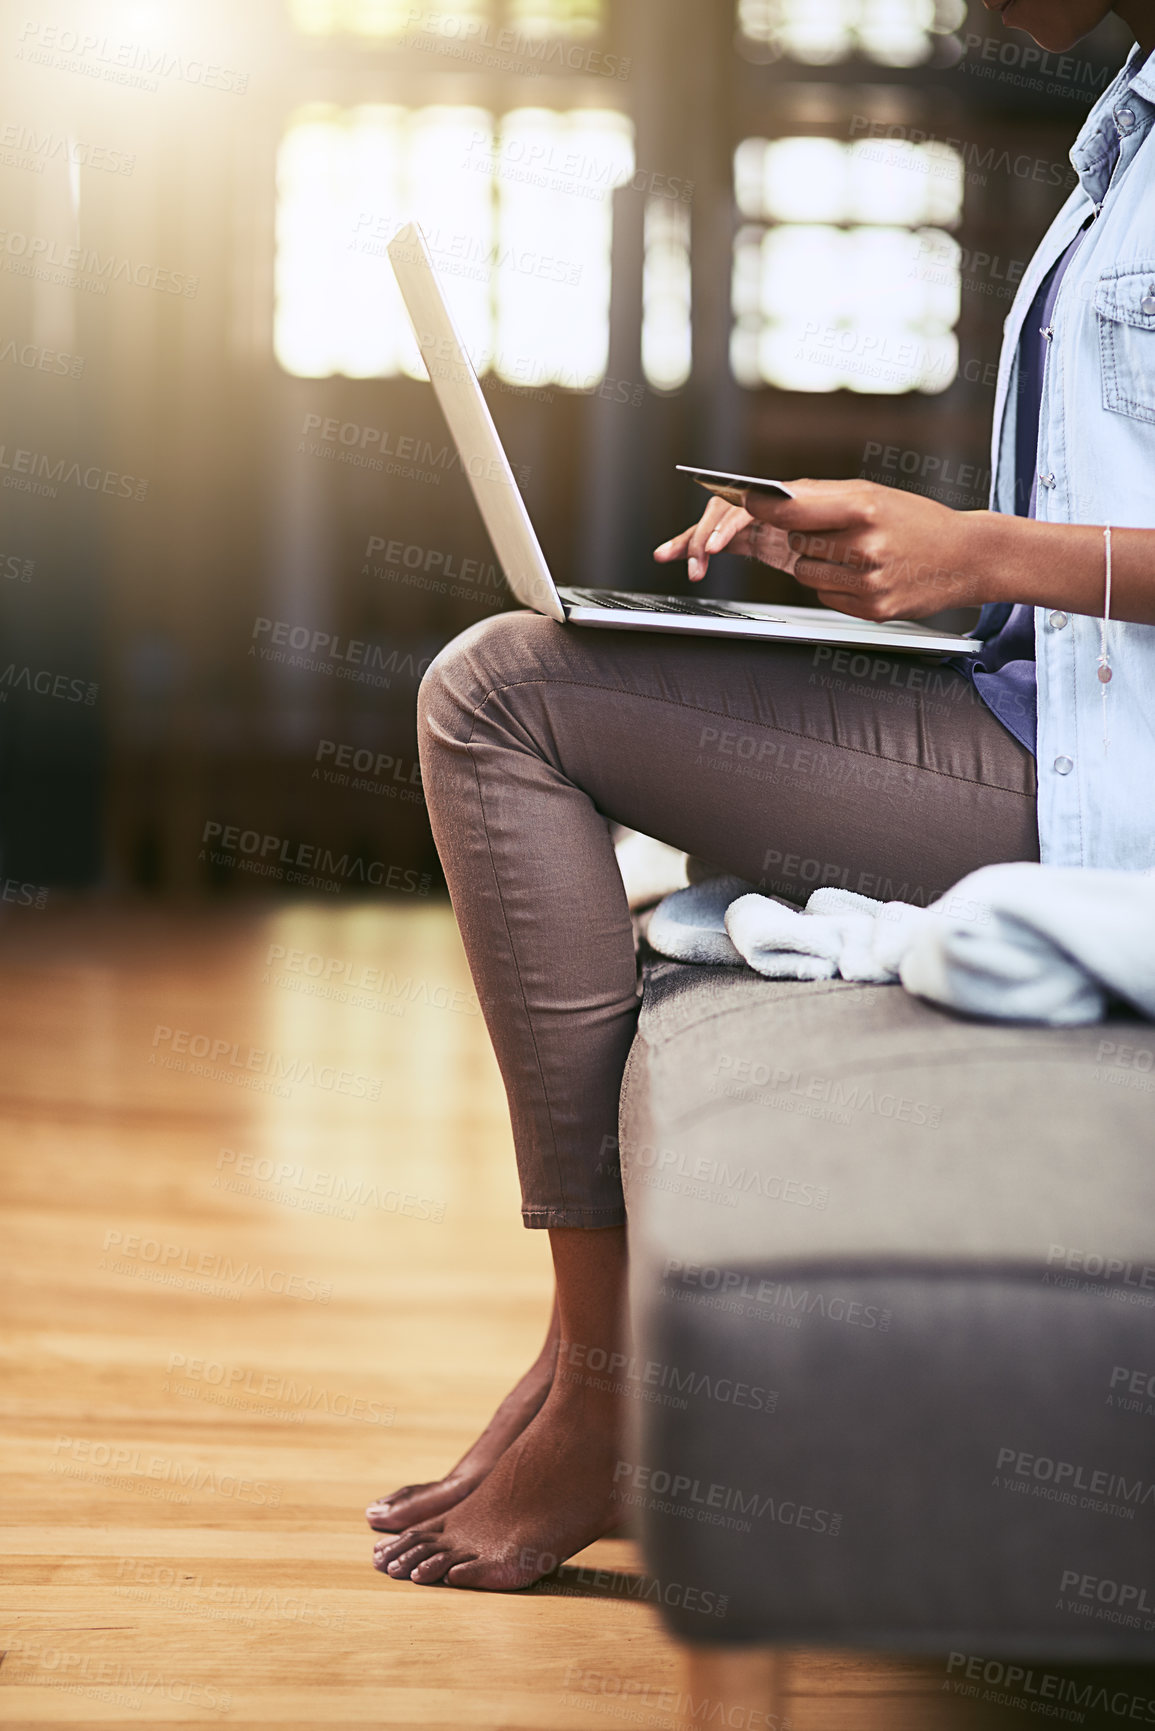 Buy stock photo Cropped shot of a woman using a laptop and credit card on the sofa at home